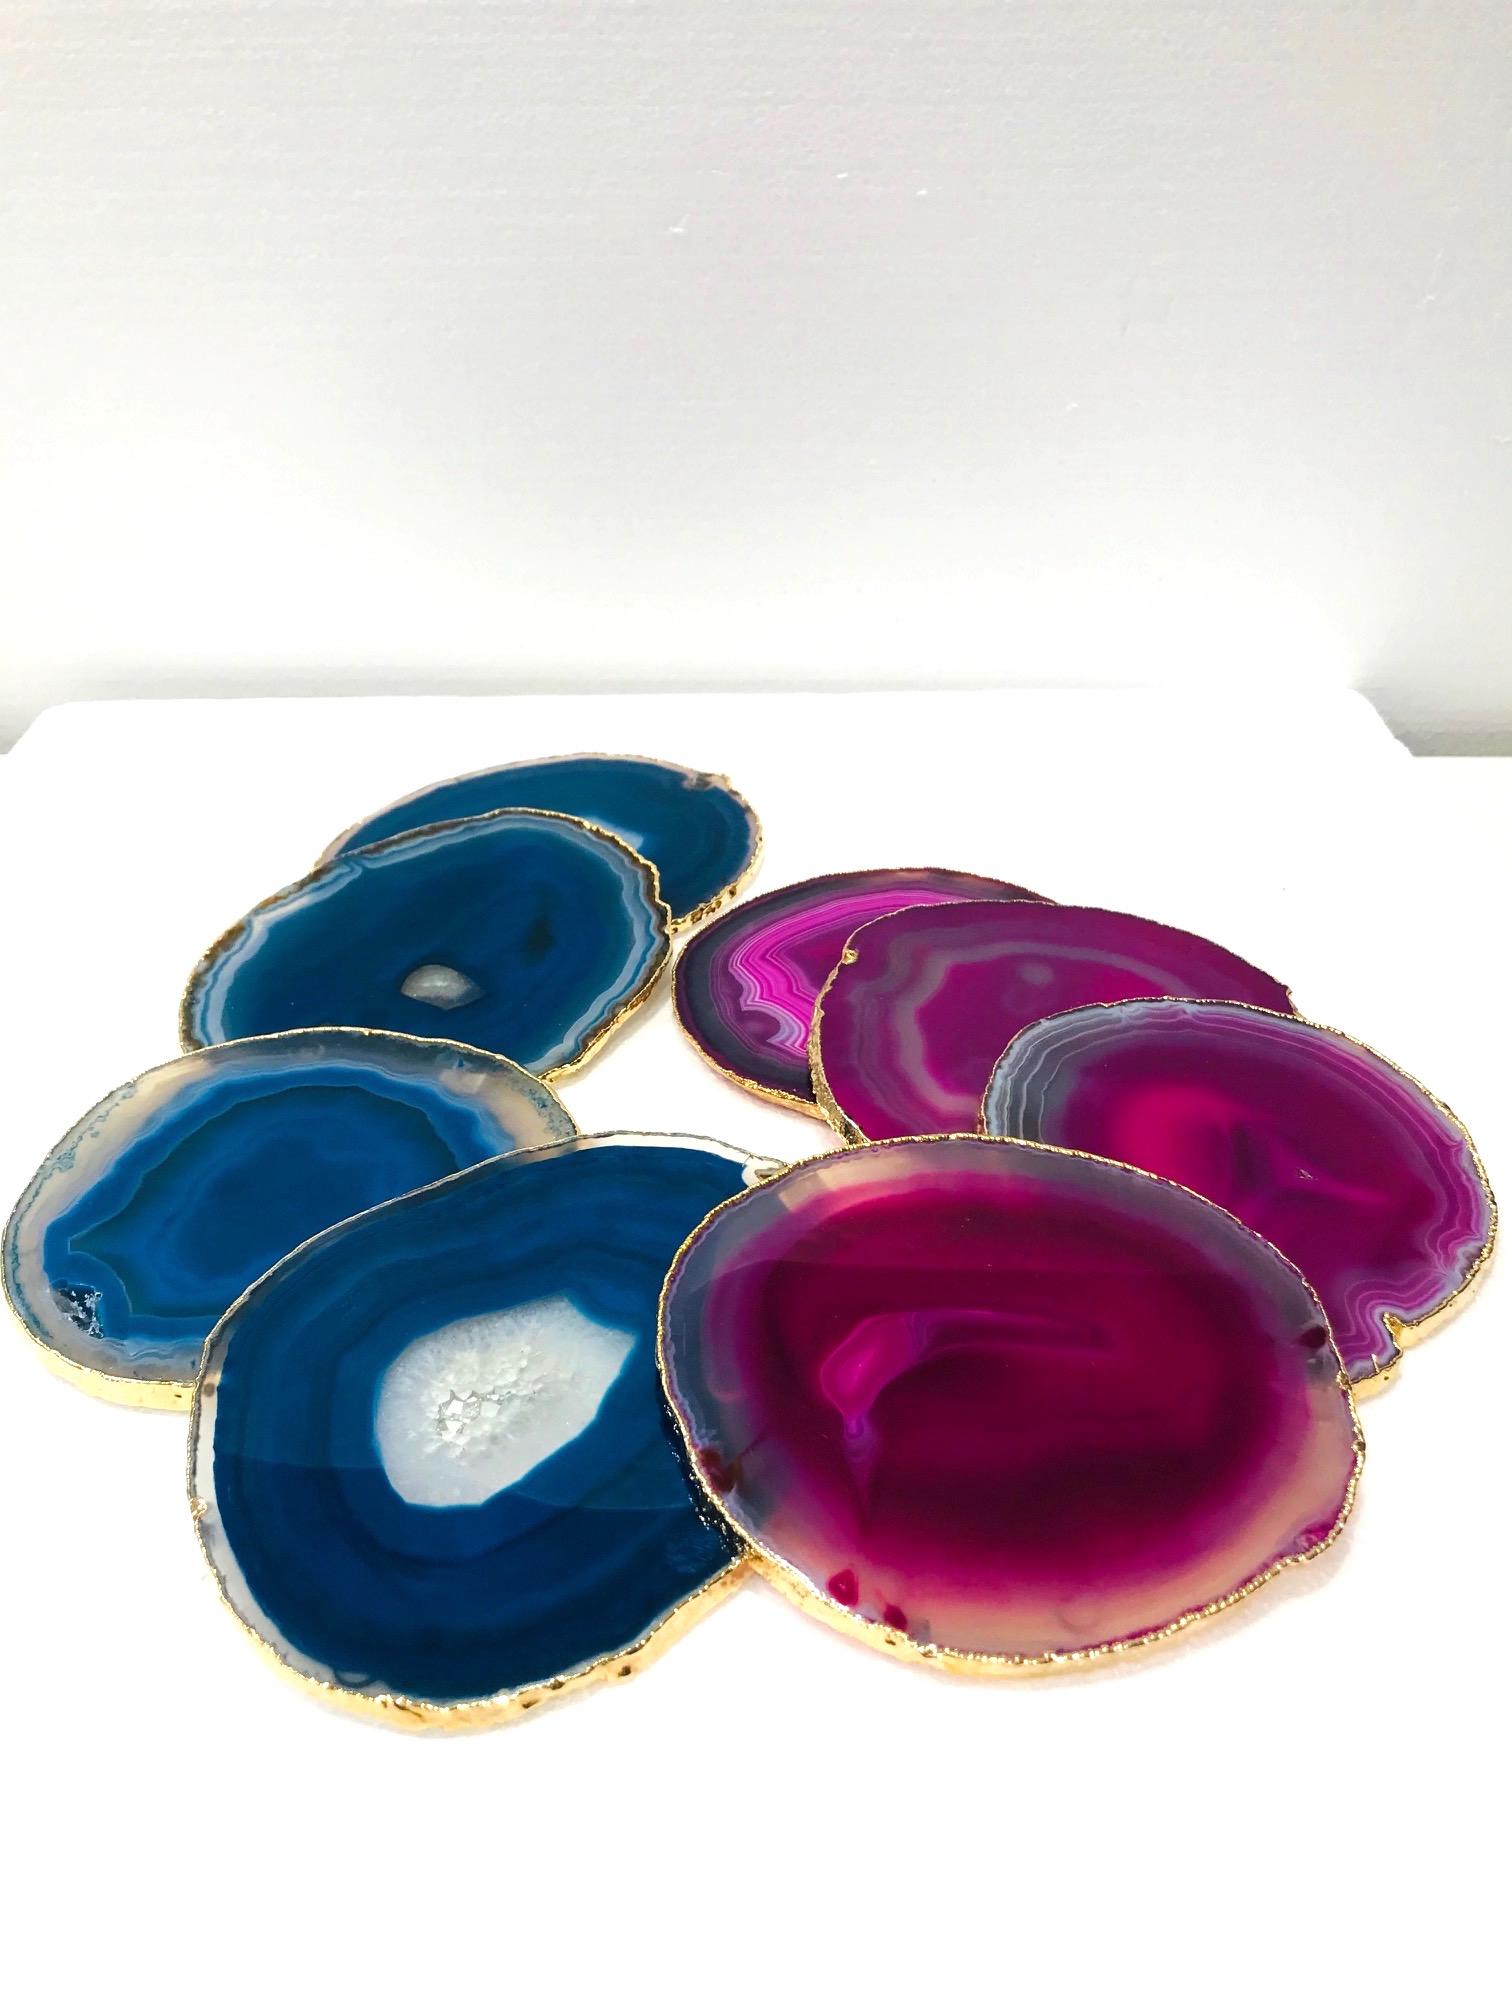 Gold Plate Semi-Precious Gemstone Coasters in Pink and Turquoise with 24k Gold Trim, Set /8 For Sale